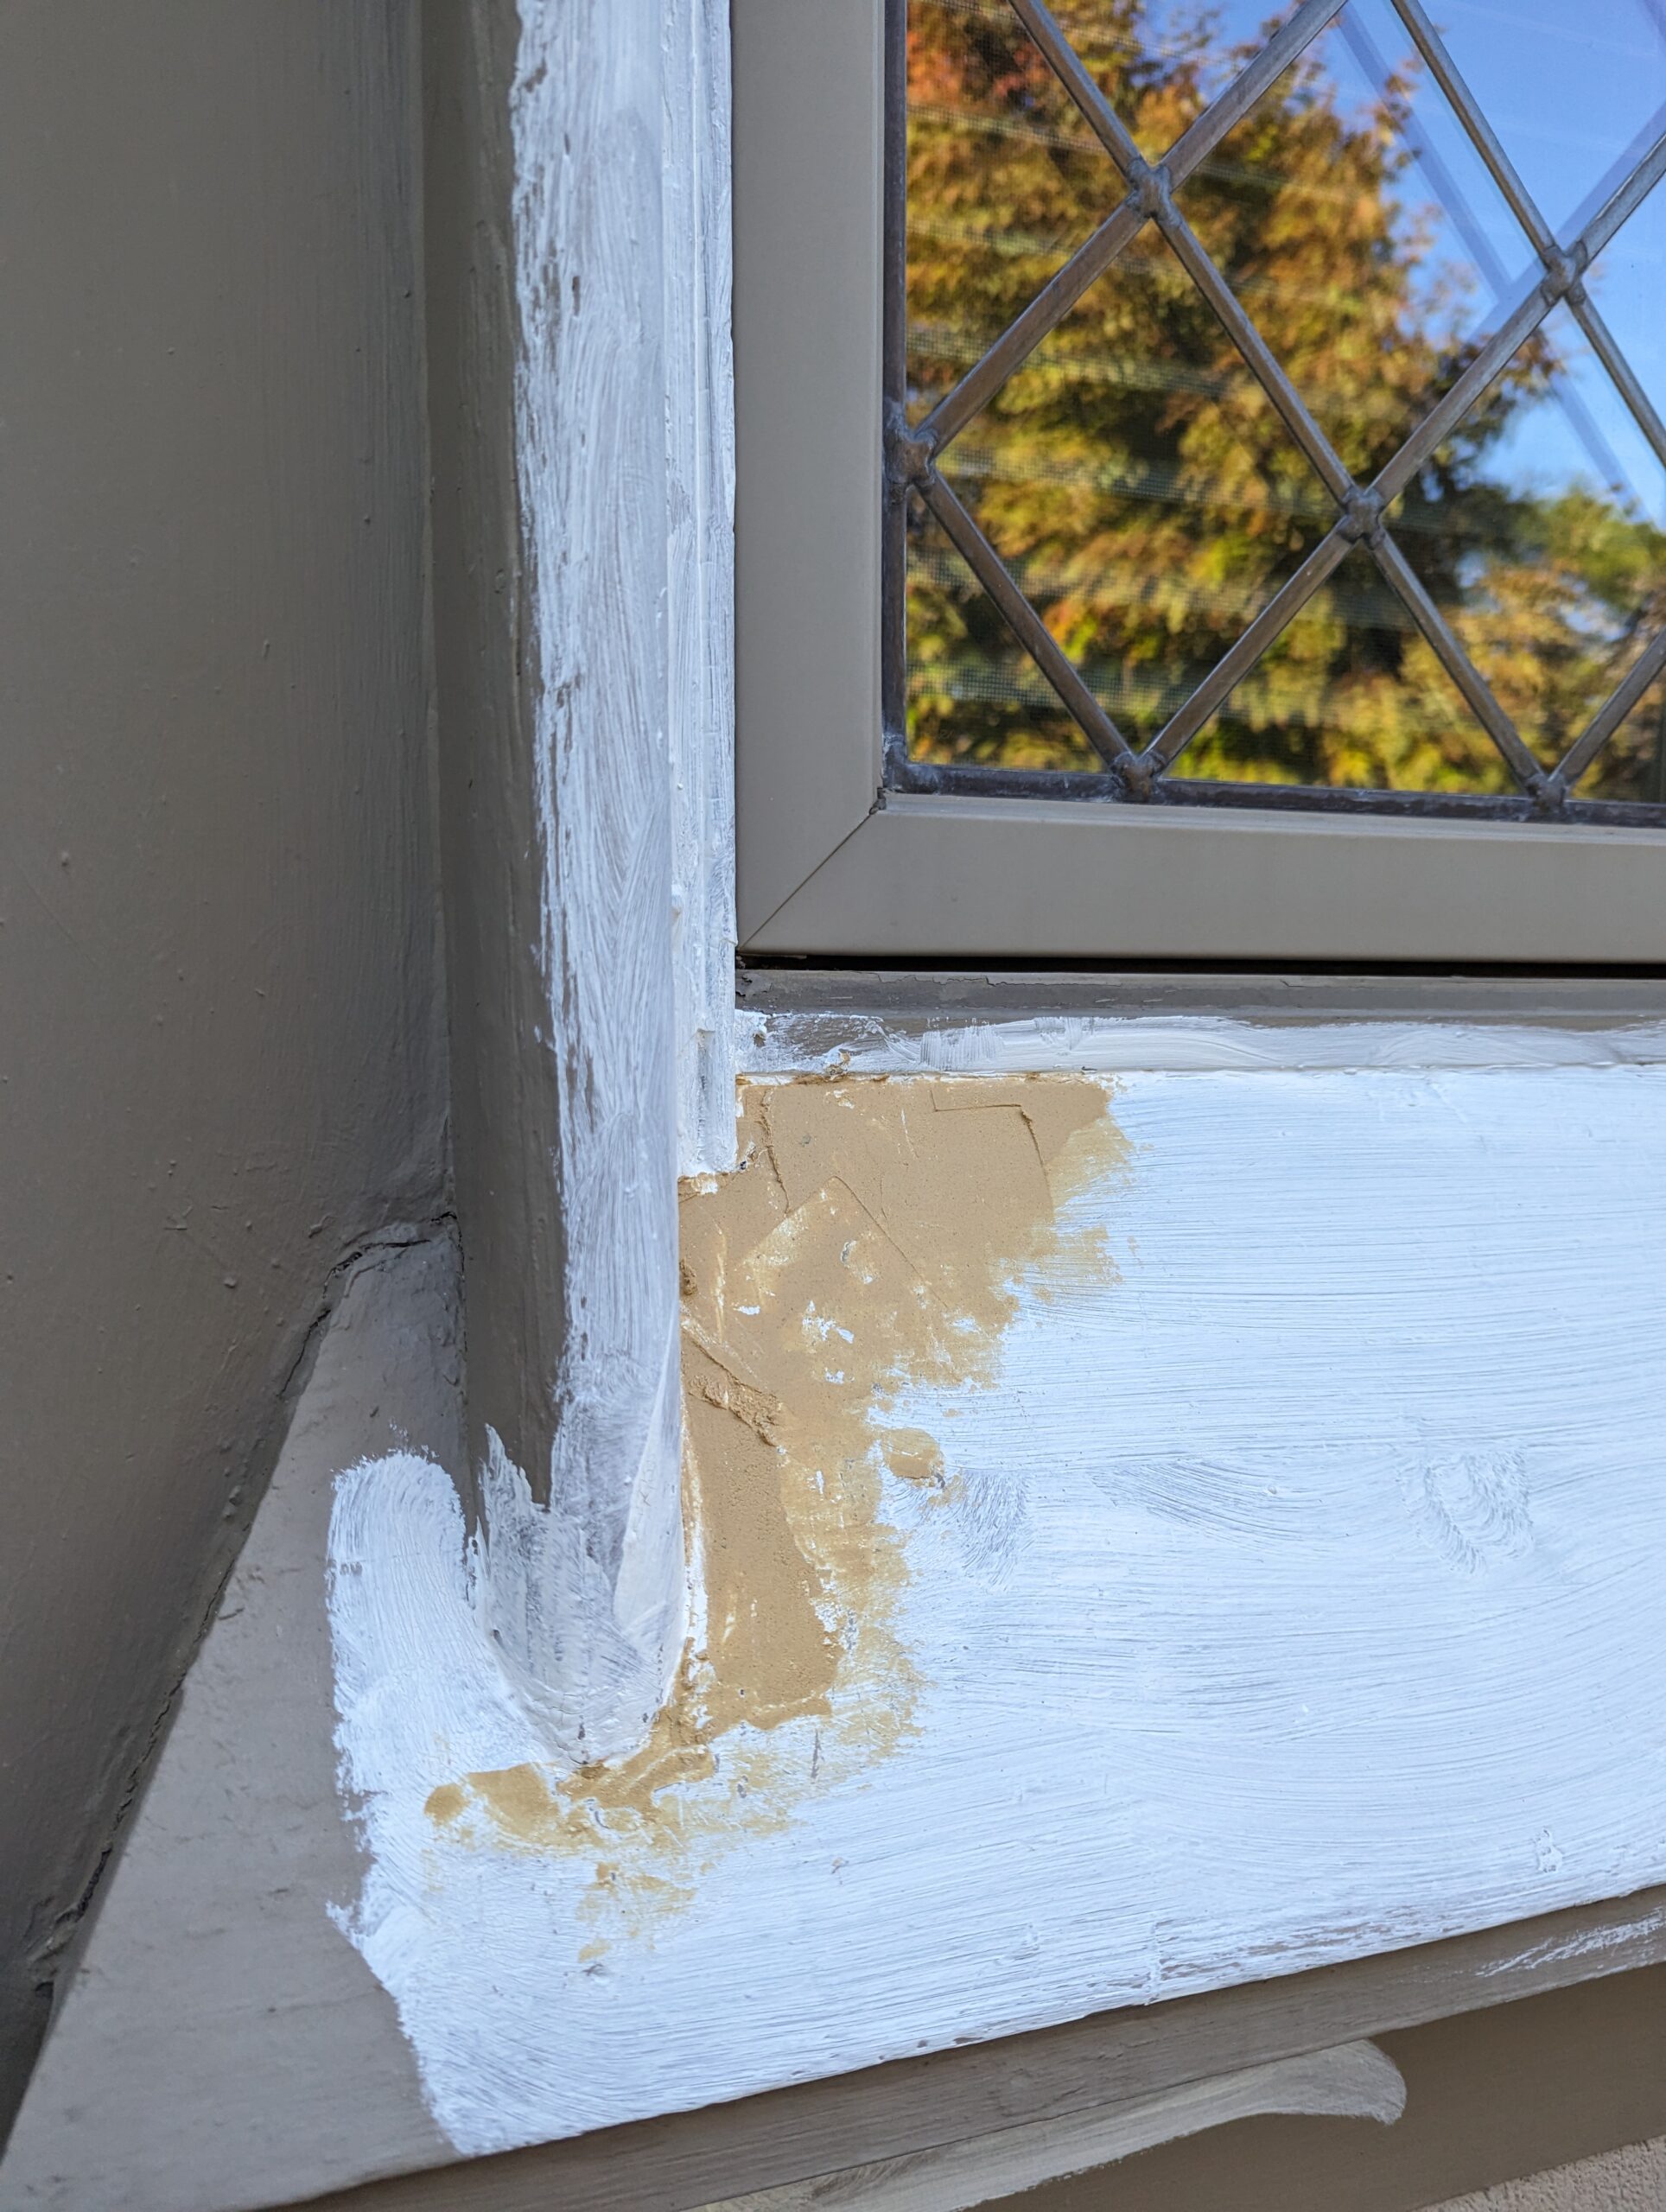 During Painting window frames exterior-scrapping sanding, caulking, priming, painting in Leaside, Toronto